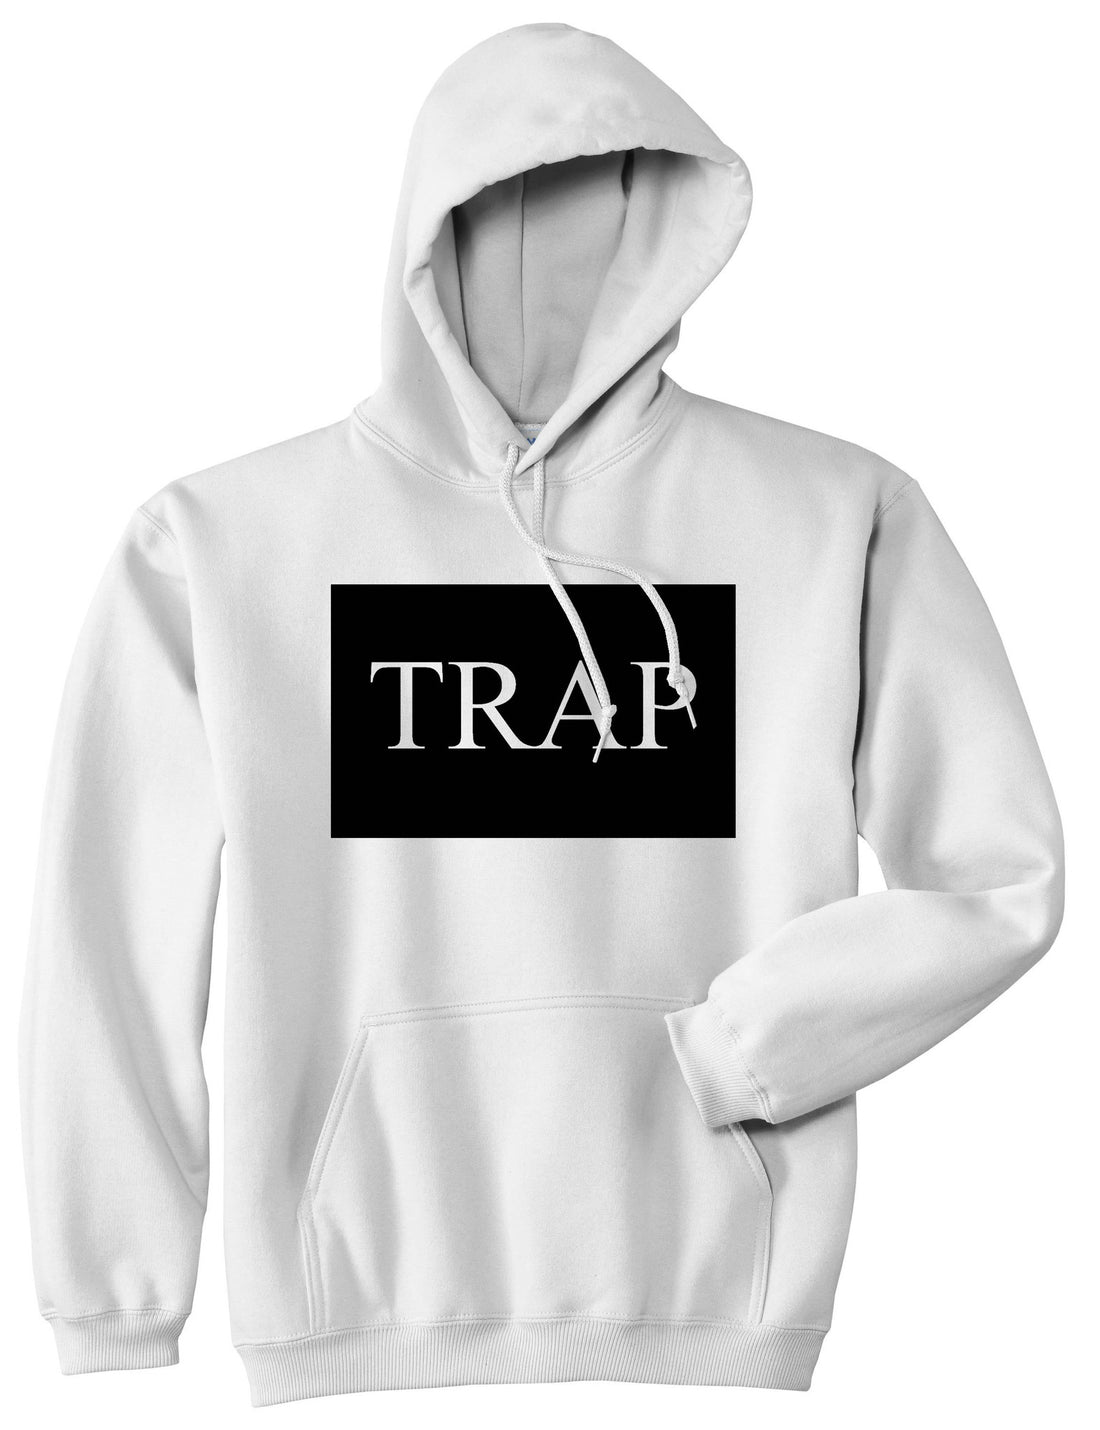 Trap Rectangle Logo Boys Kids Pullover Hoodie Hoody in White By Kings Of NY